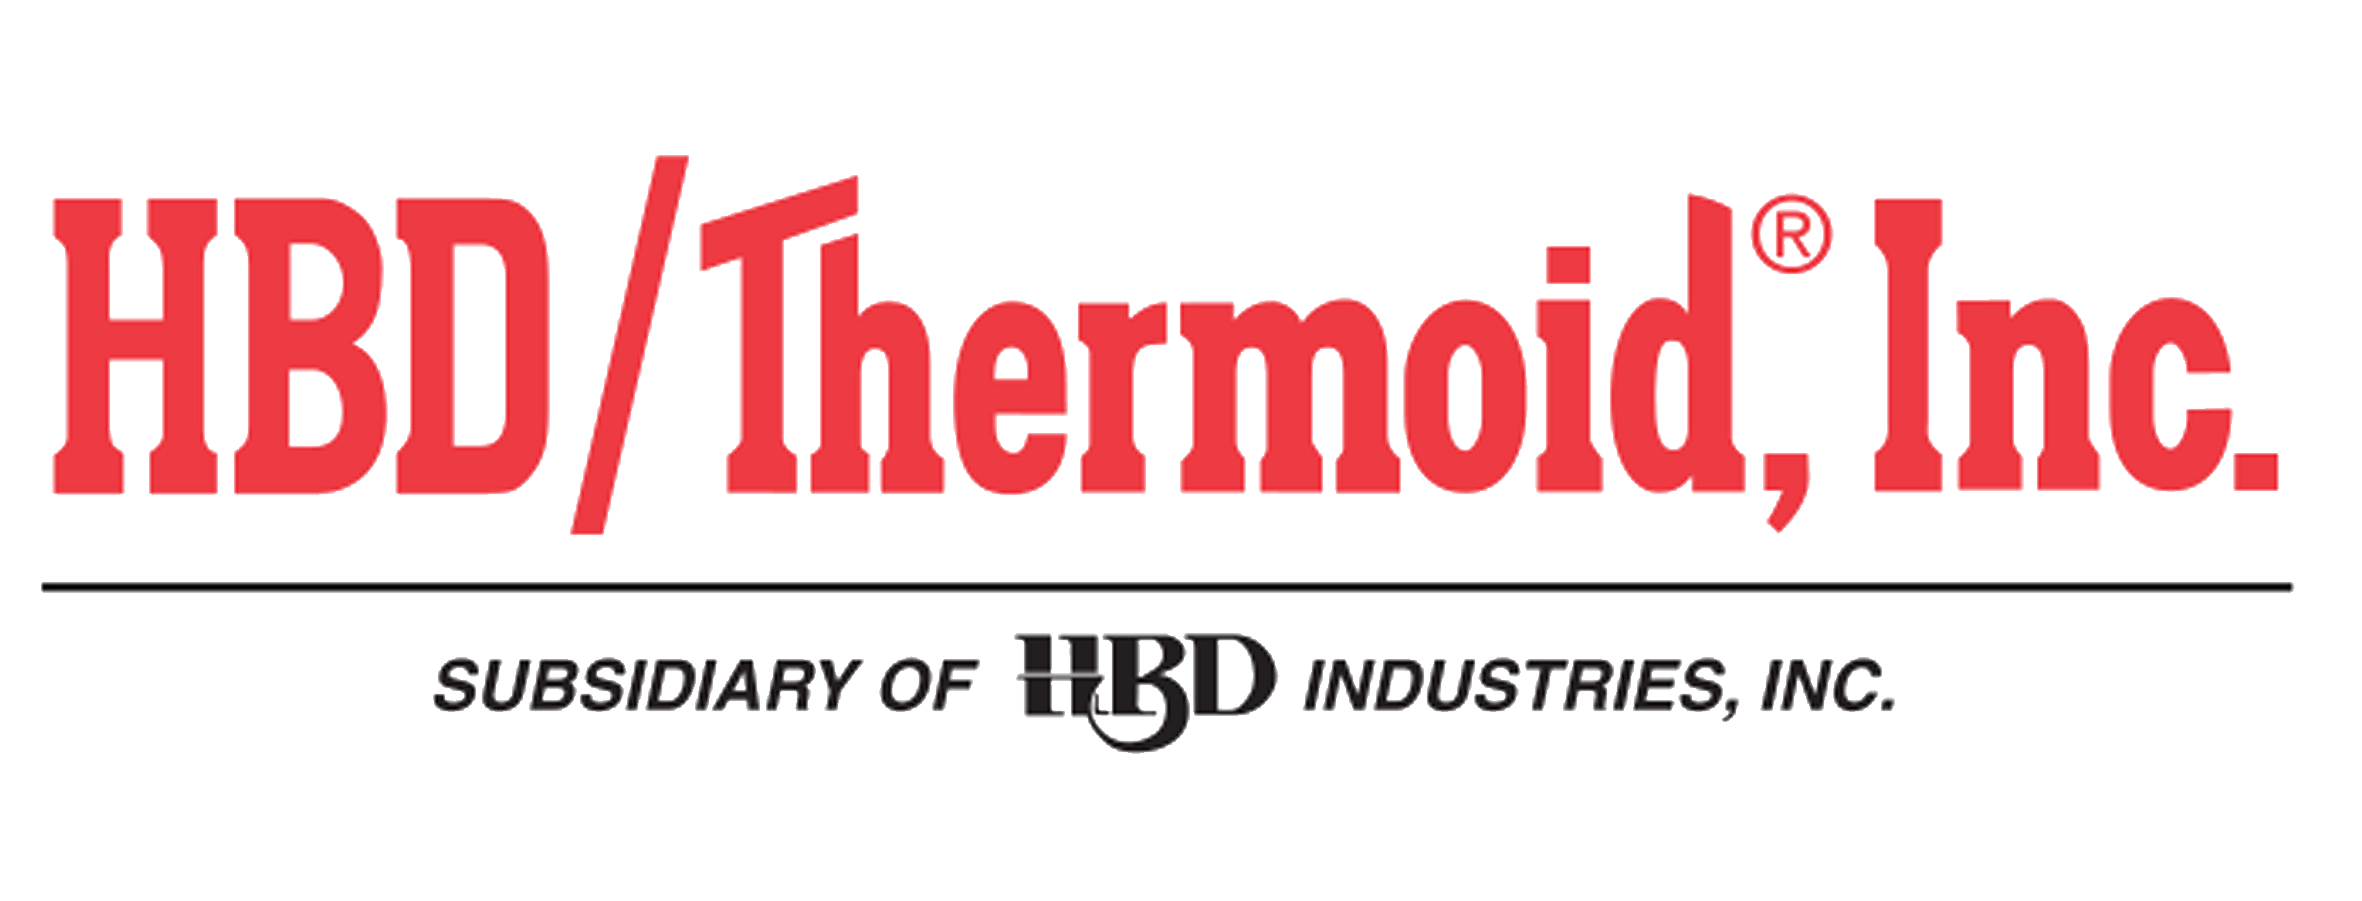 thermoid